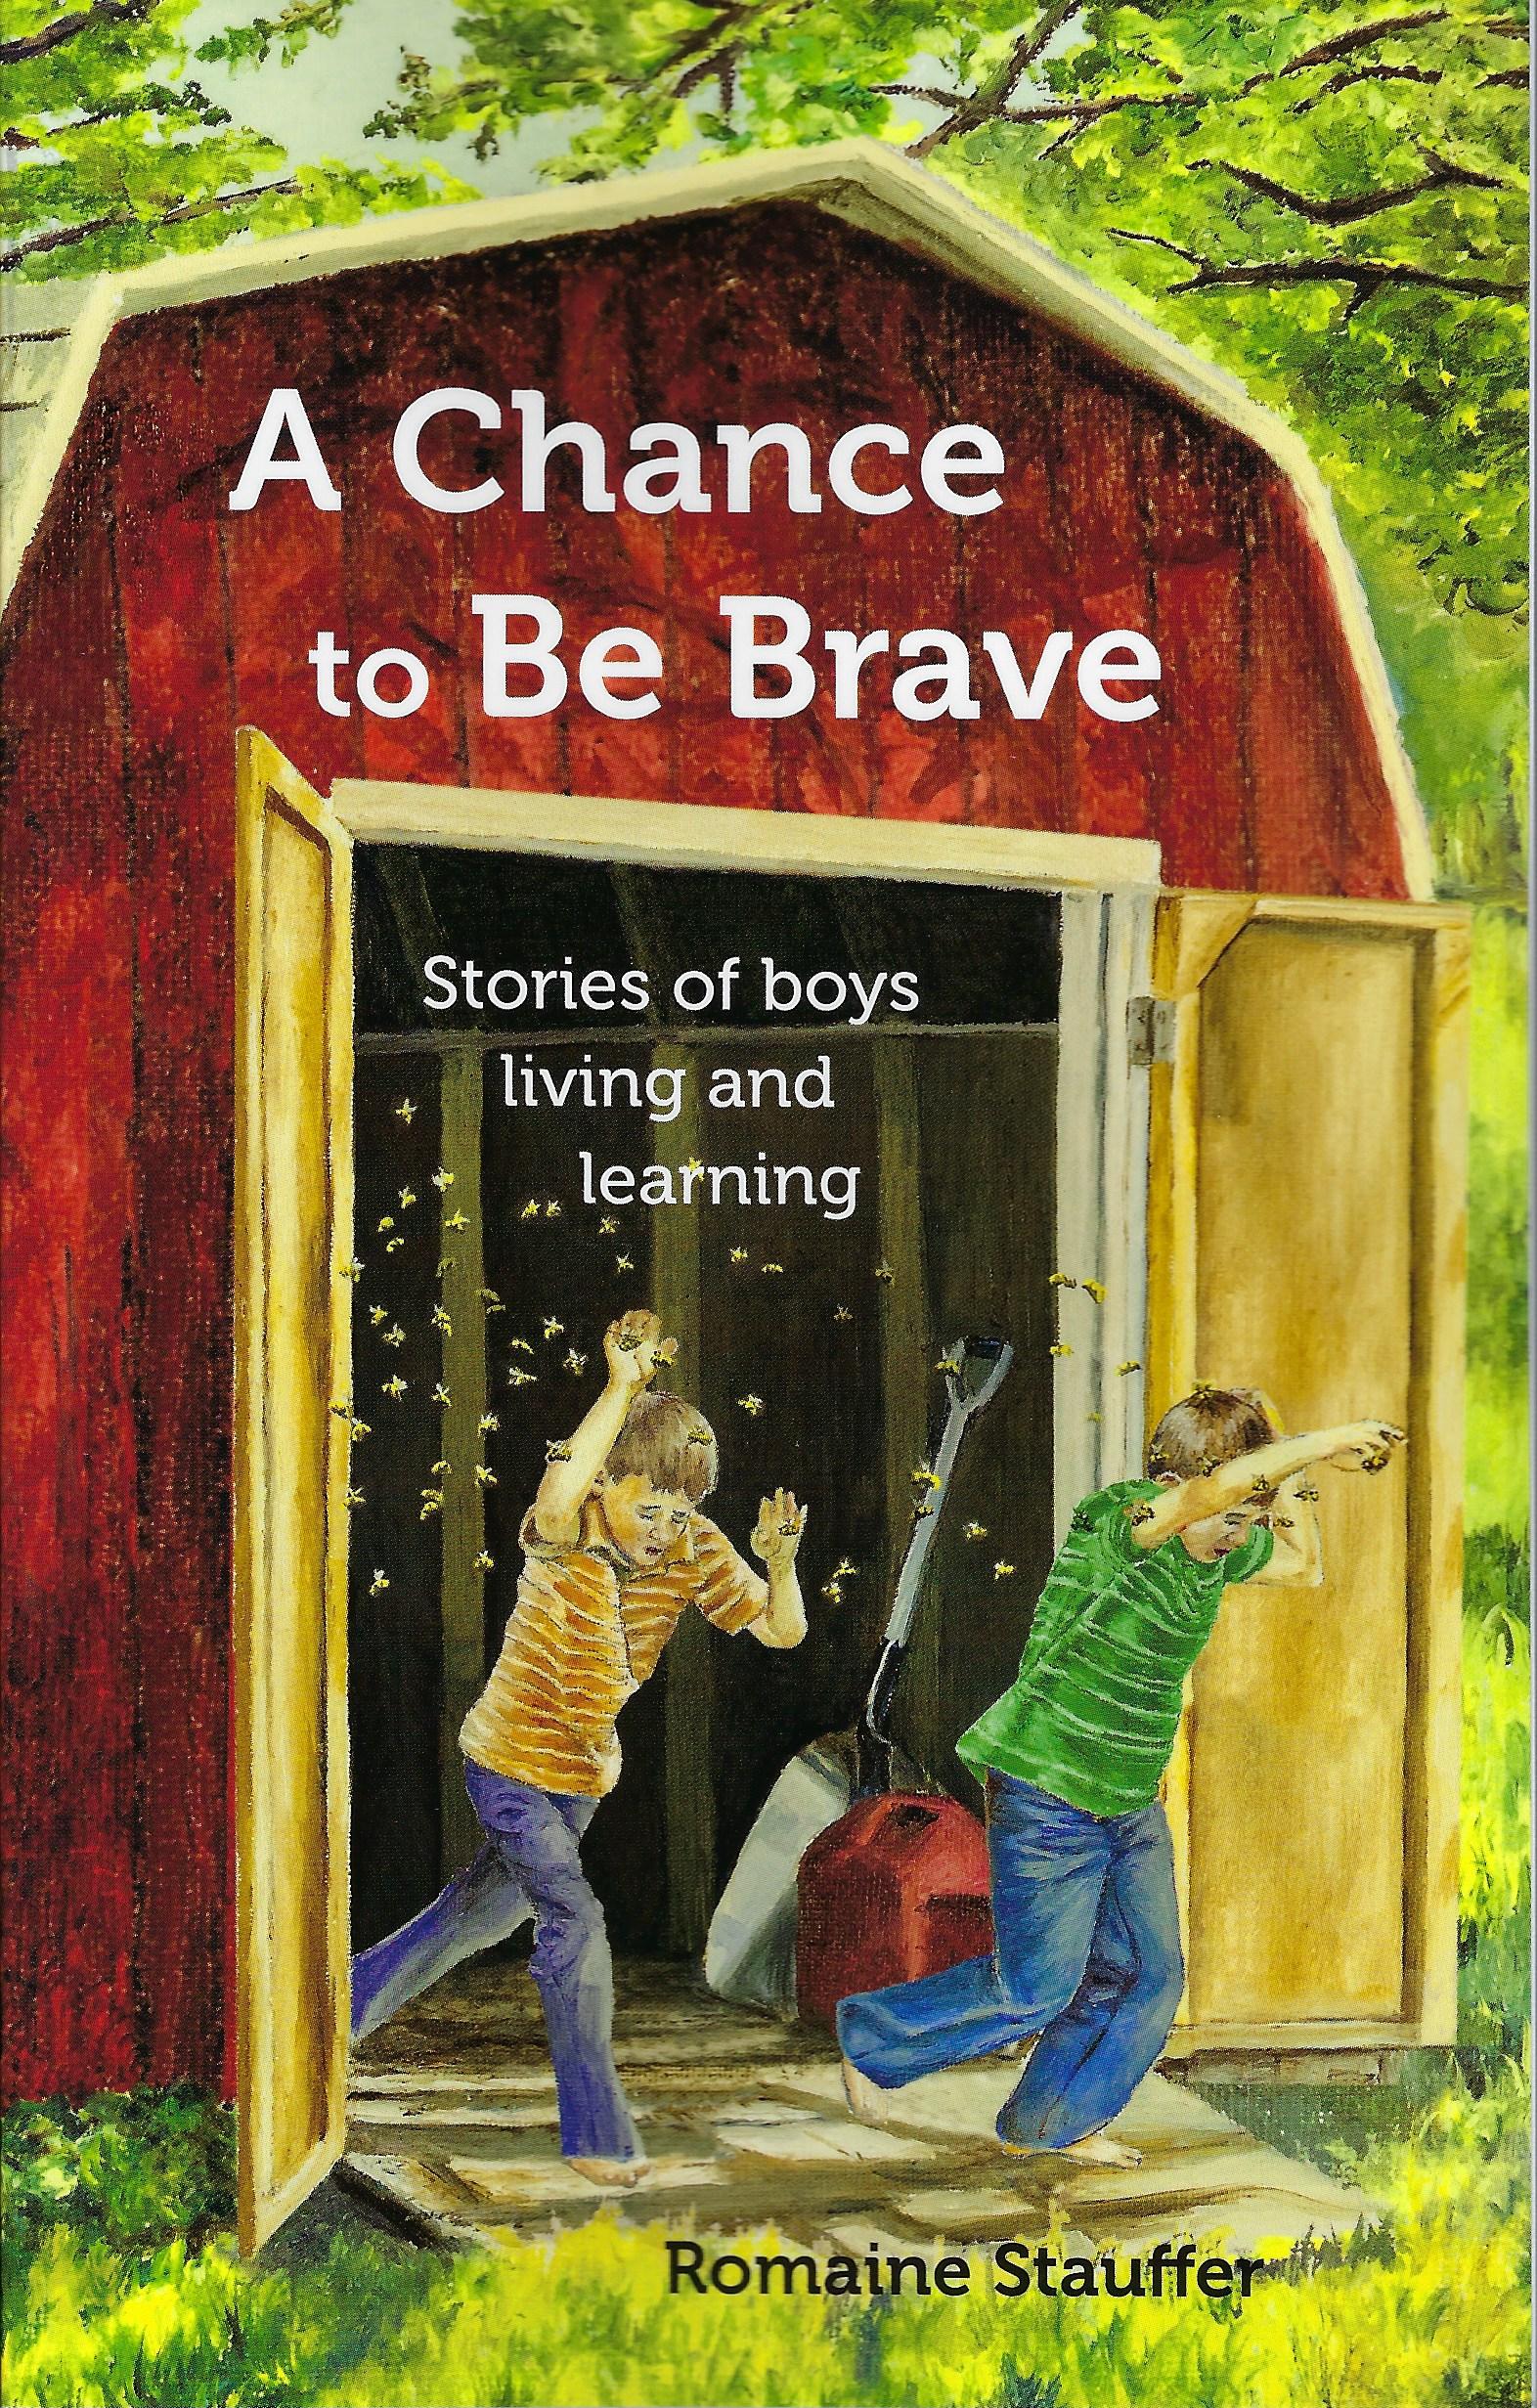 A Chance to be Brave Romaine Stauffer